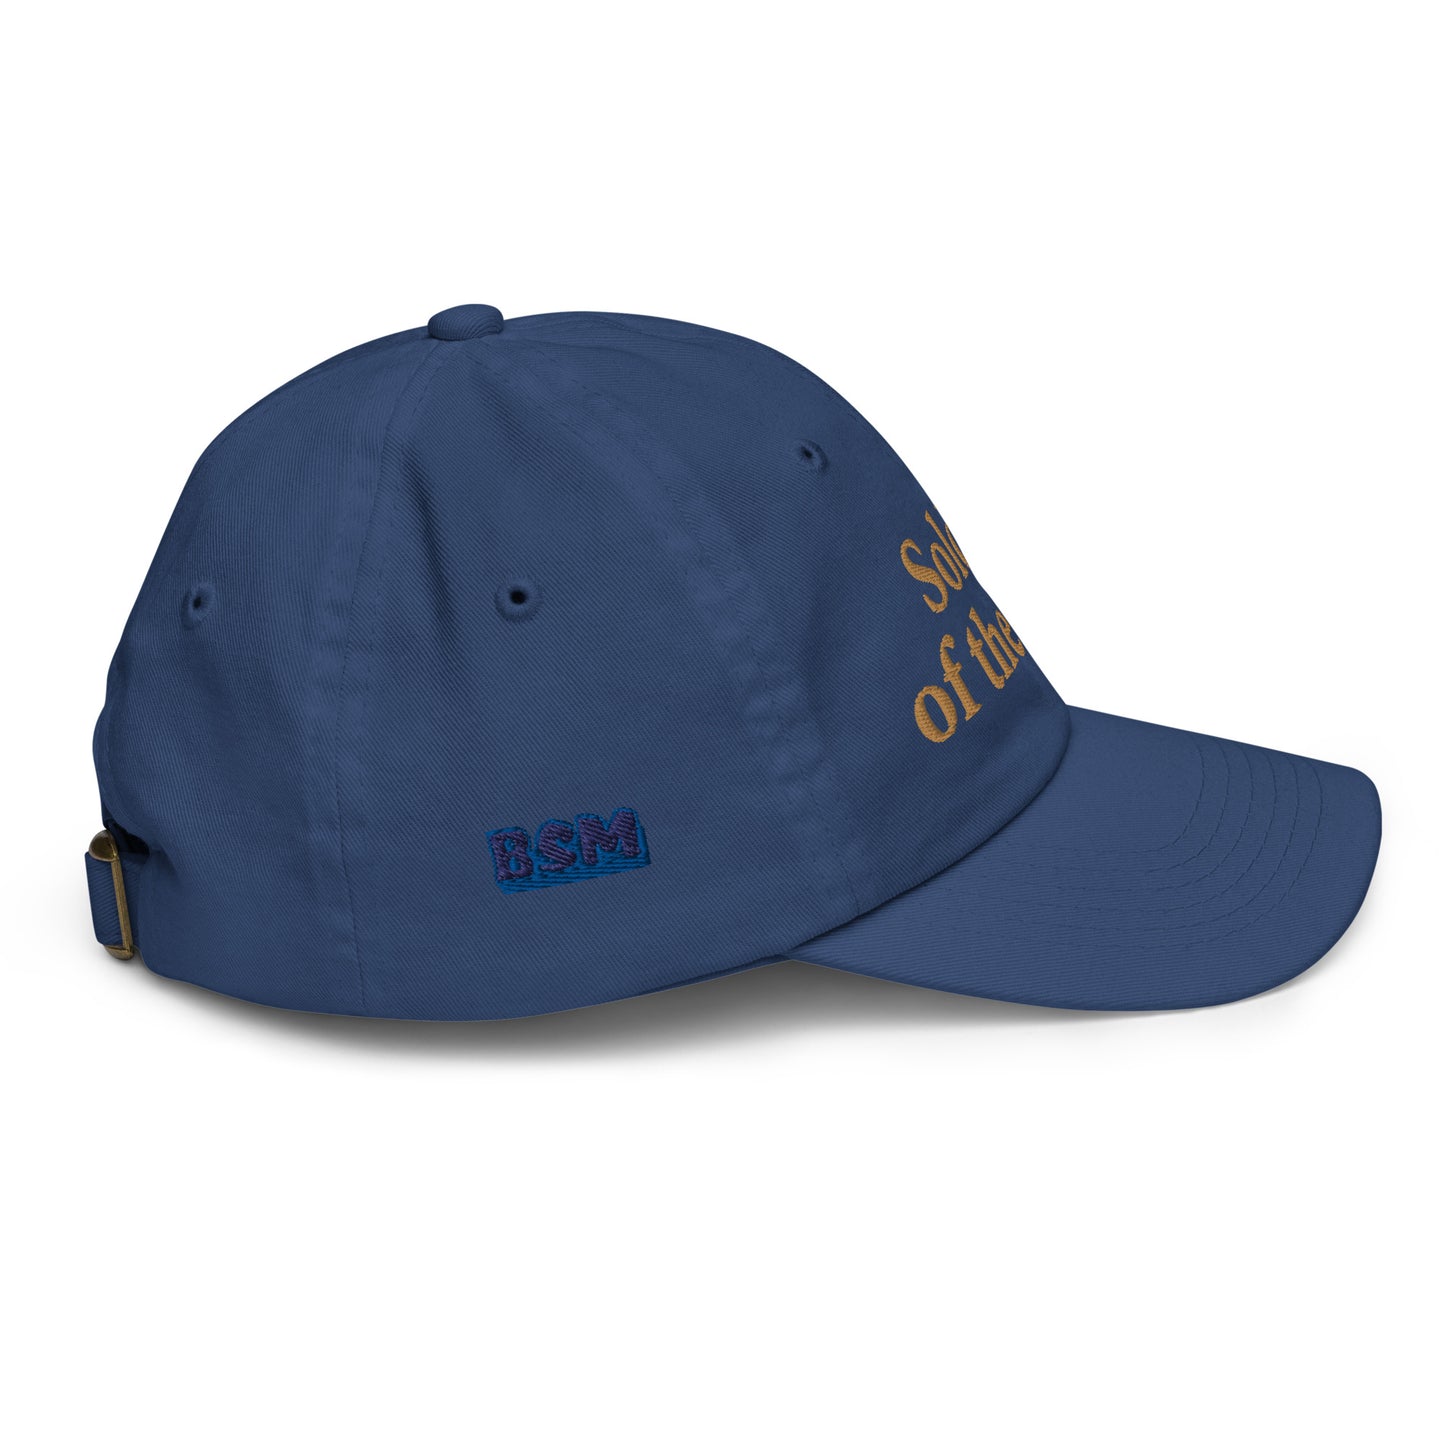 Soldier of the Lord Youth Baseball Cap